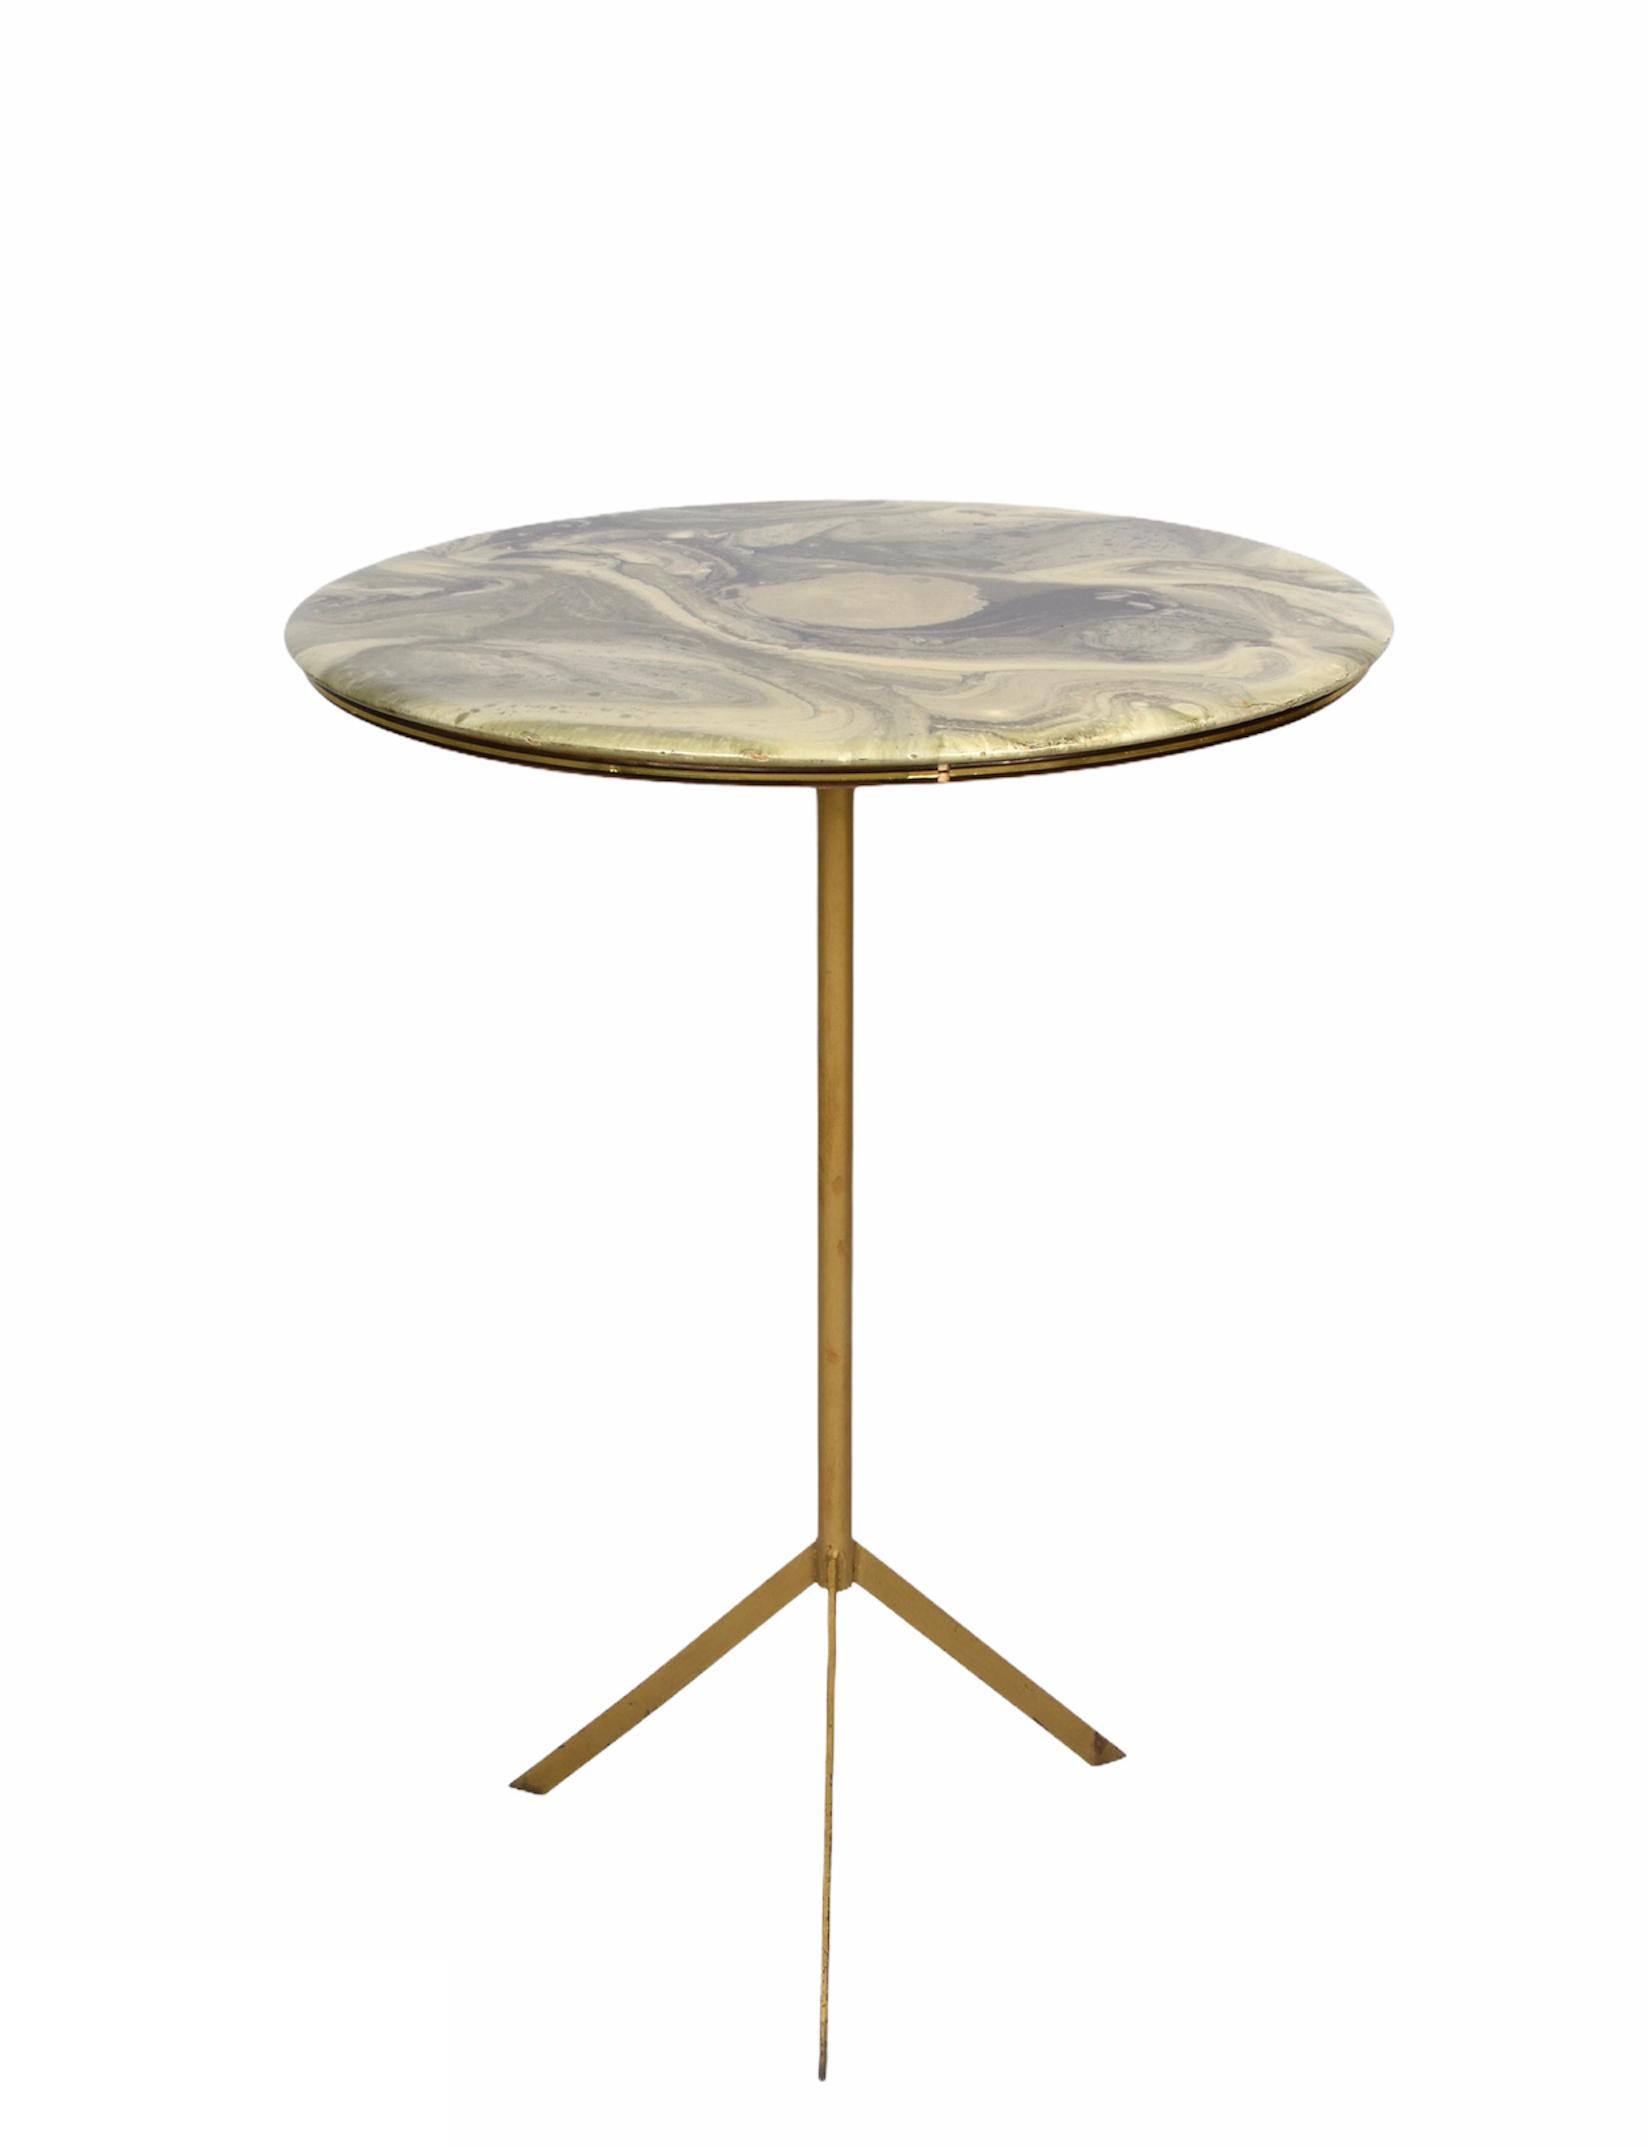 Lacquered Midcentury Round Italian Gueridon Table with Marble Resin Top and Metal, 1950s For Sale